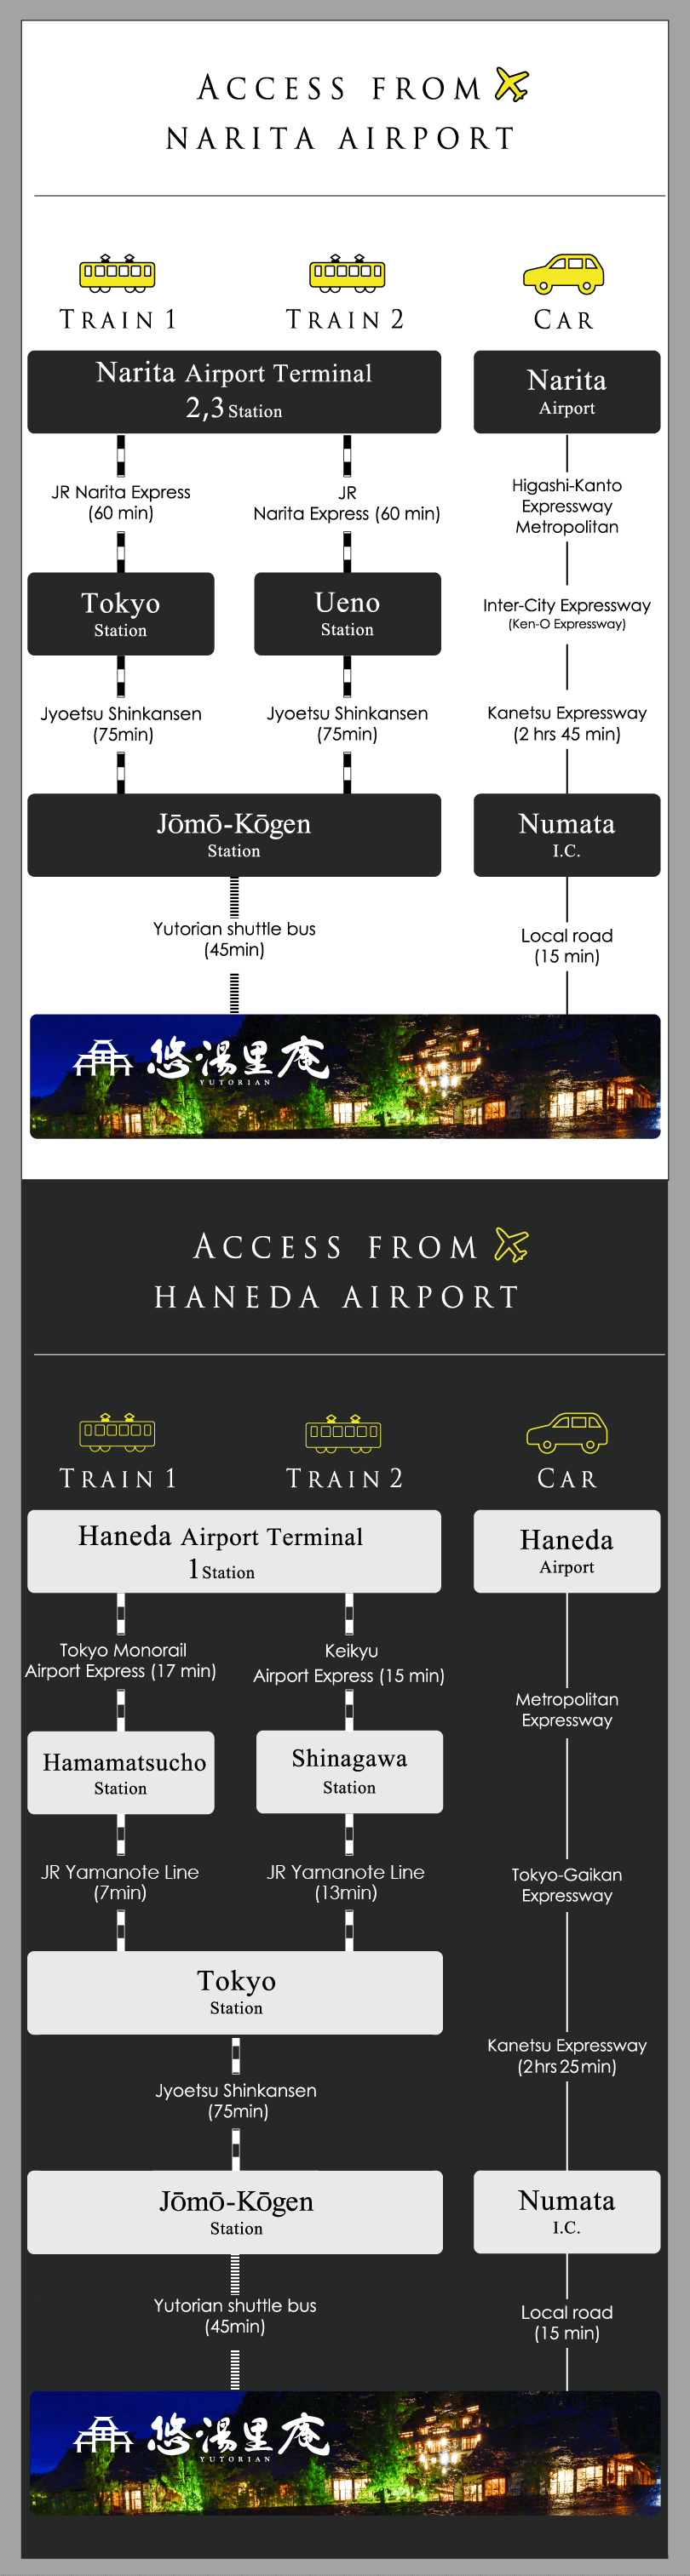 Access From Haneda Airport